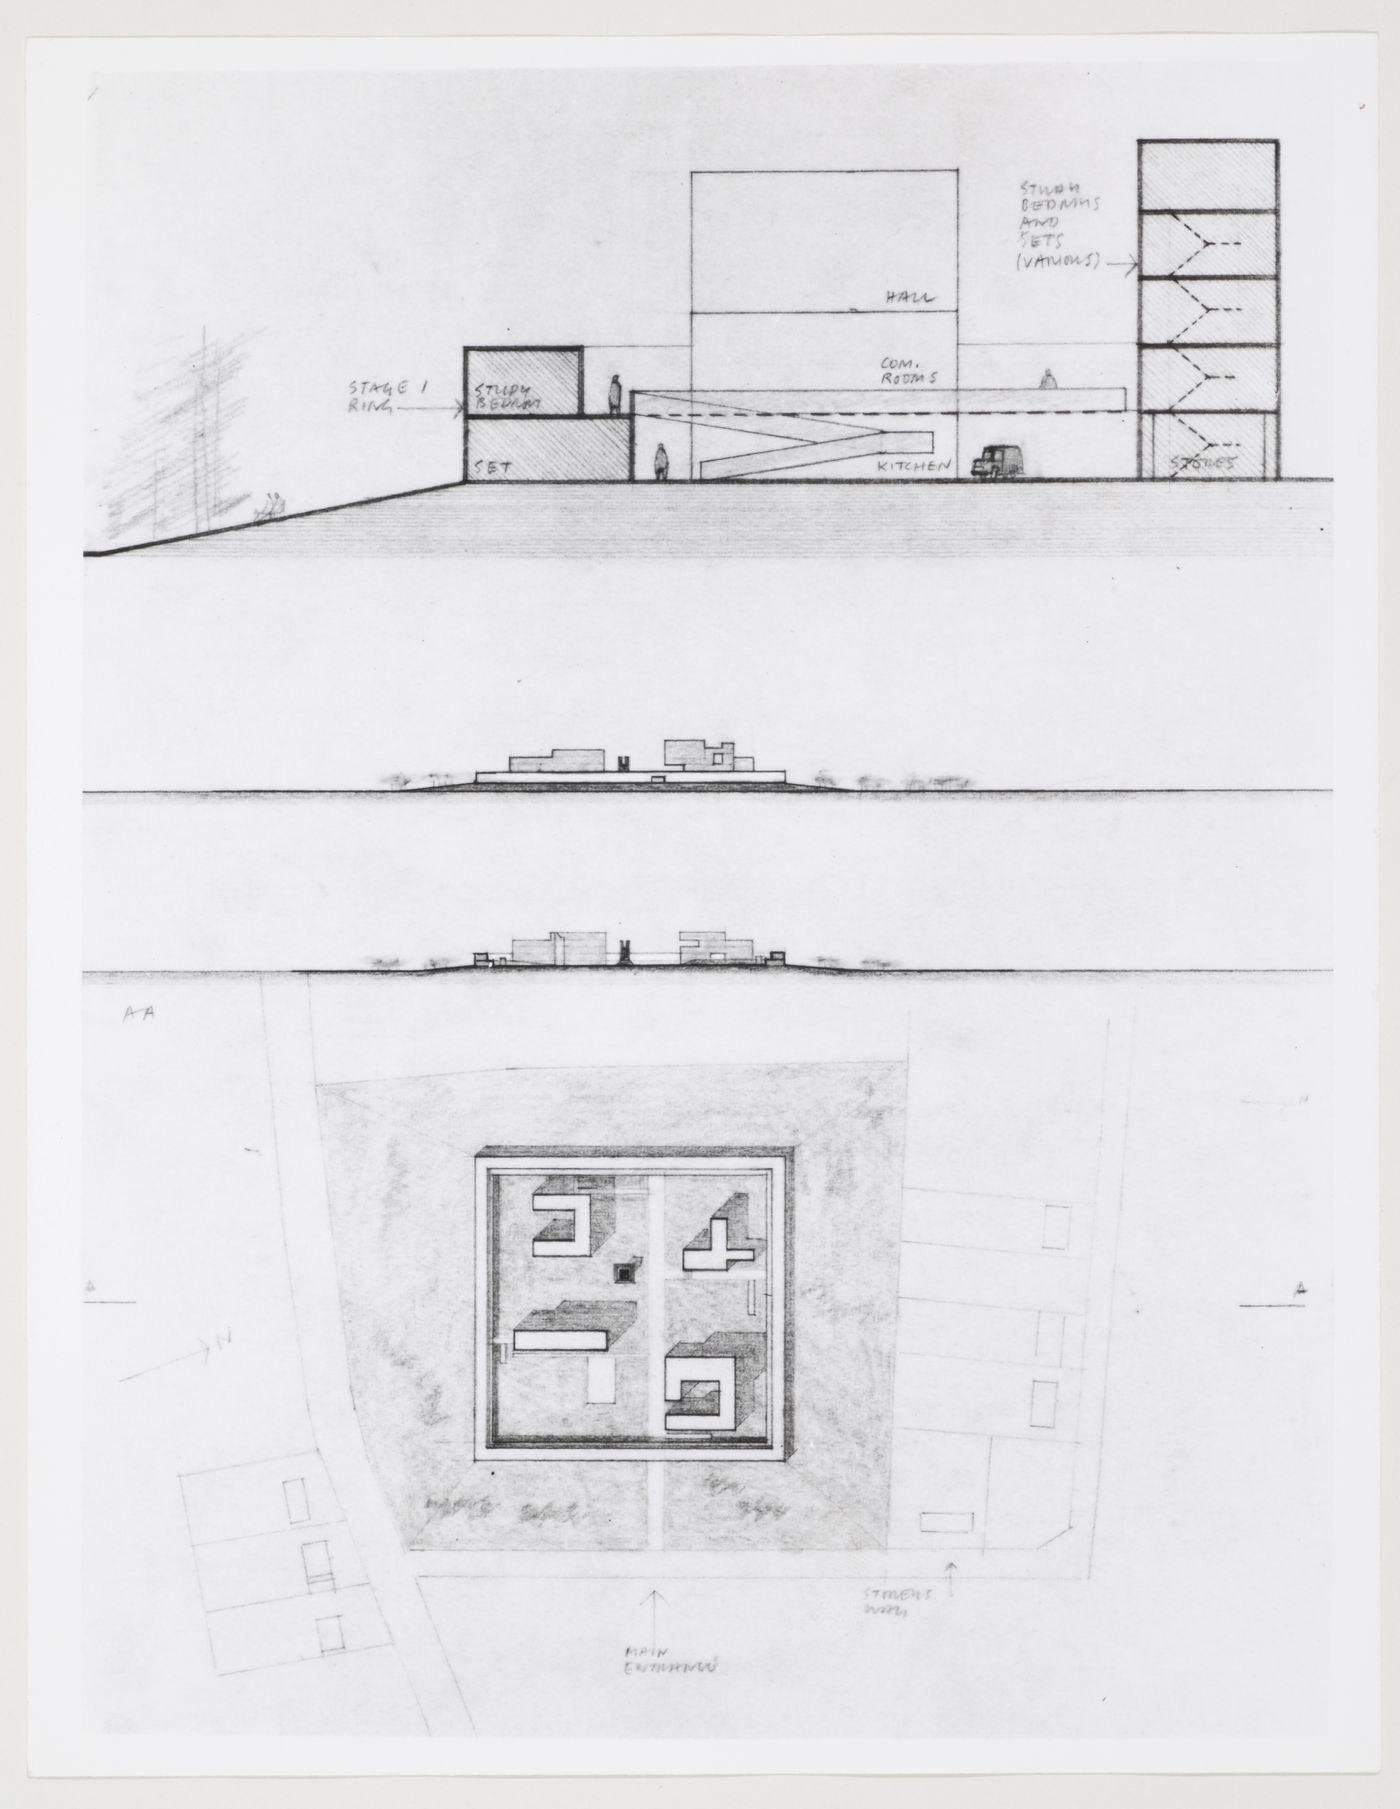 Churchill College, University of Cambridge, Cambridge, England: photograph of section, elevations and plan